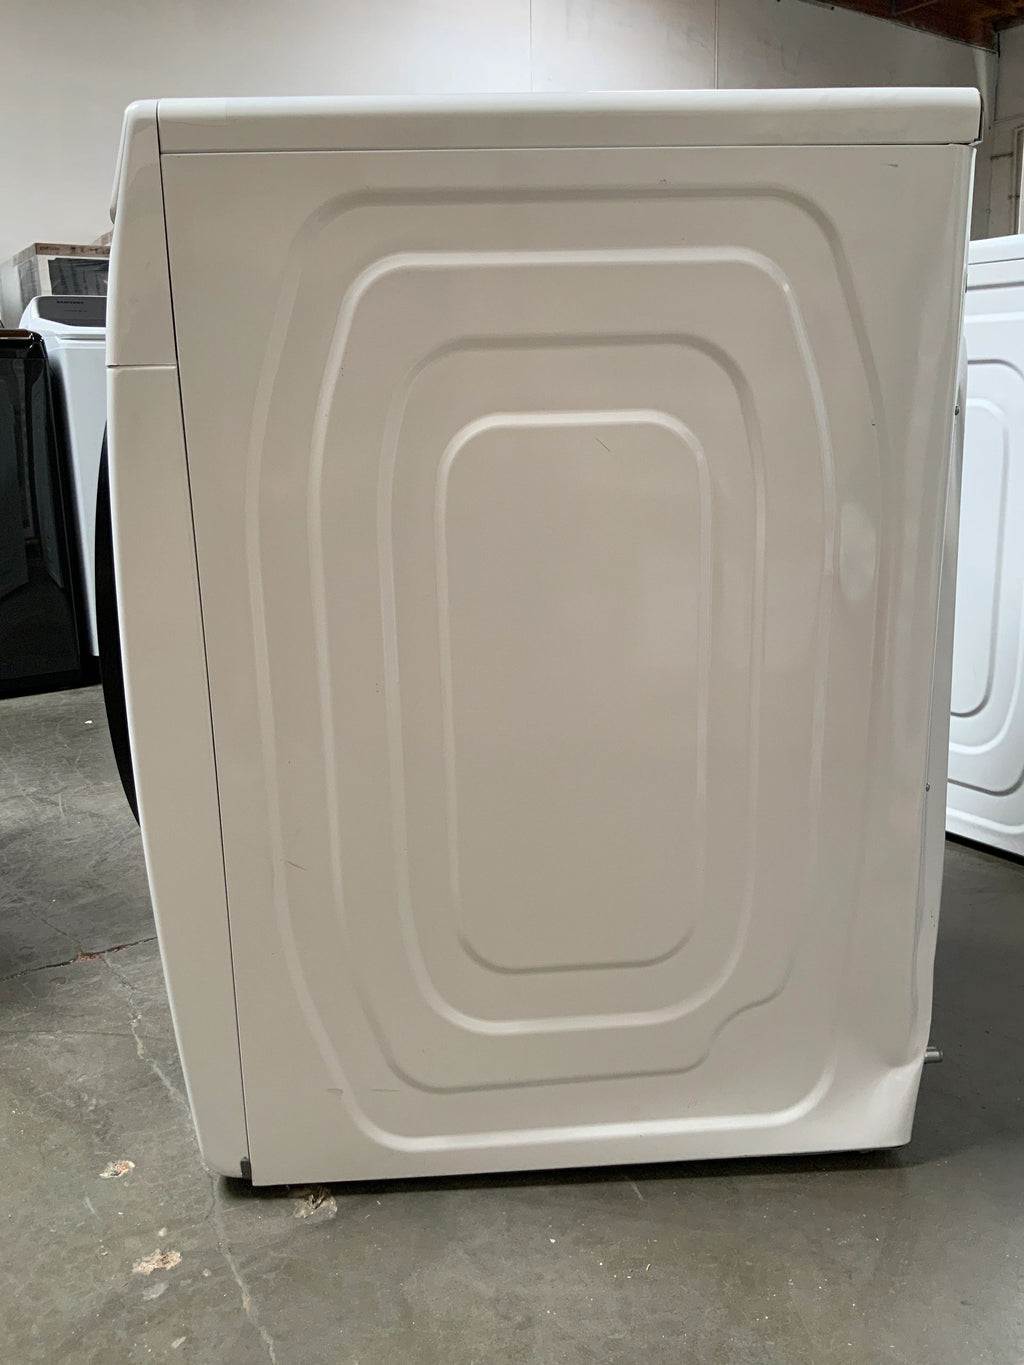 New Dent and Scratch. Samsung 7.5 cu. ft. White Gas Dryer with Steam. Model: DVG45R6100W